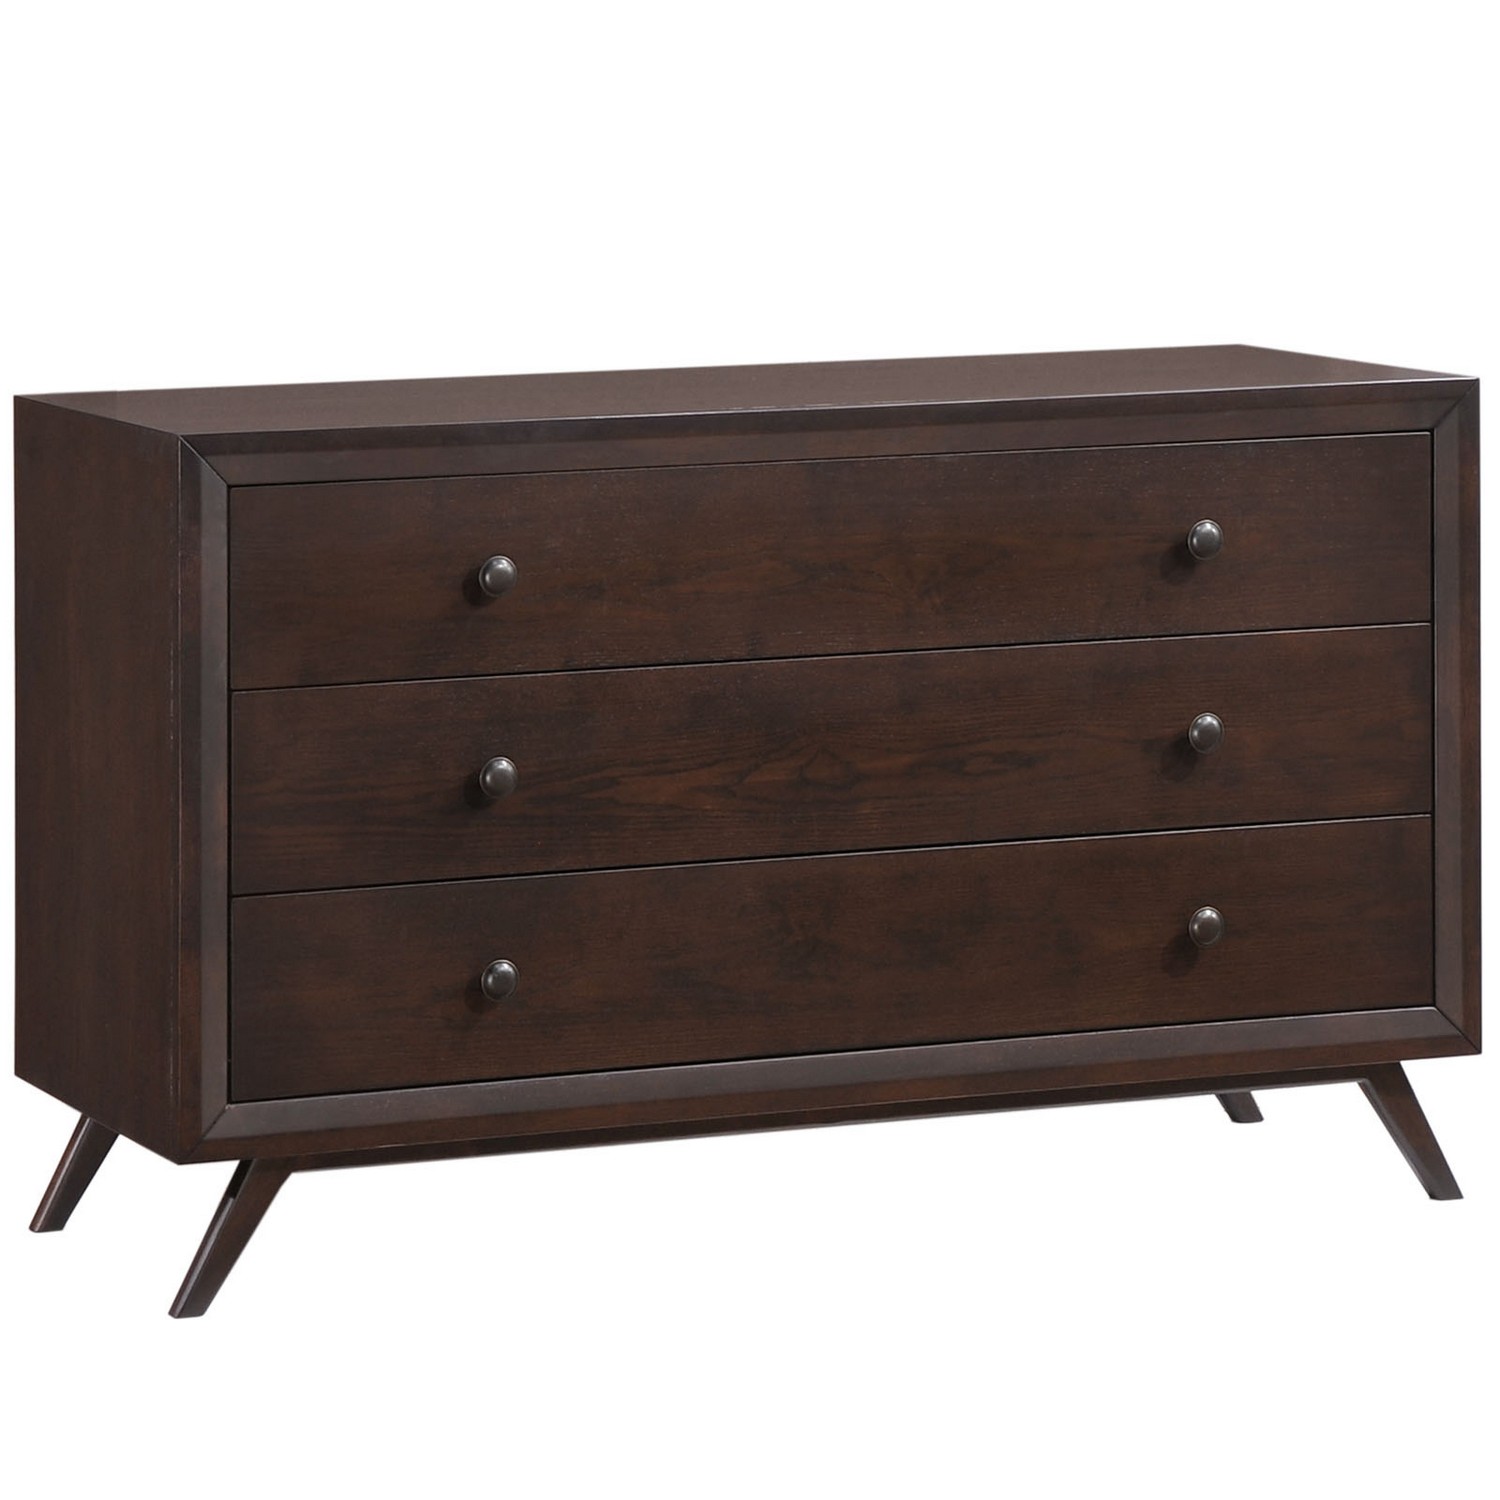 Modway Tracy Wood Dresser - Cappuccino